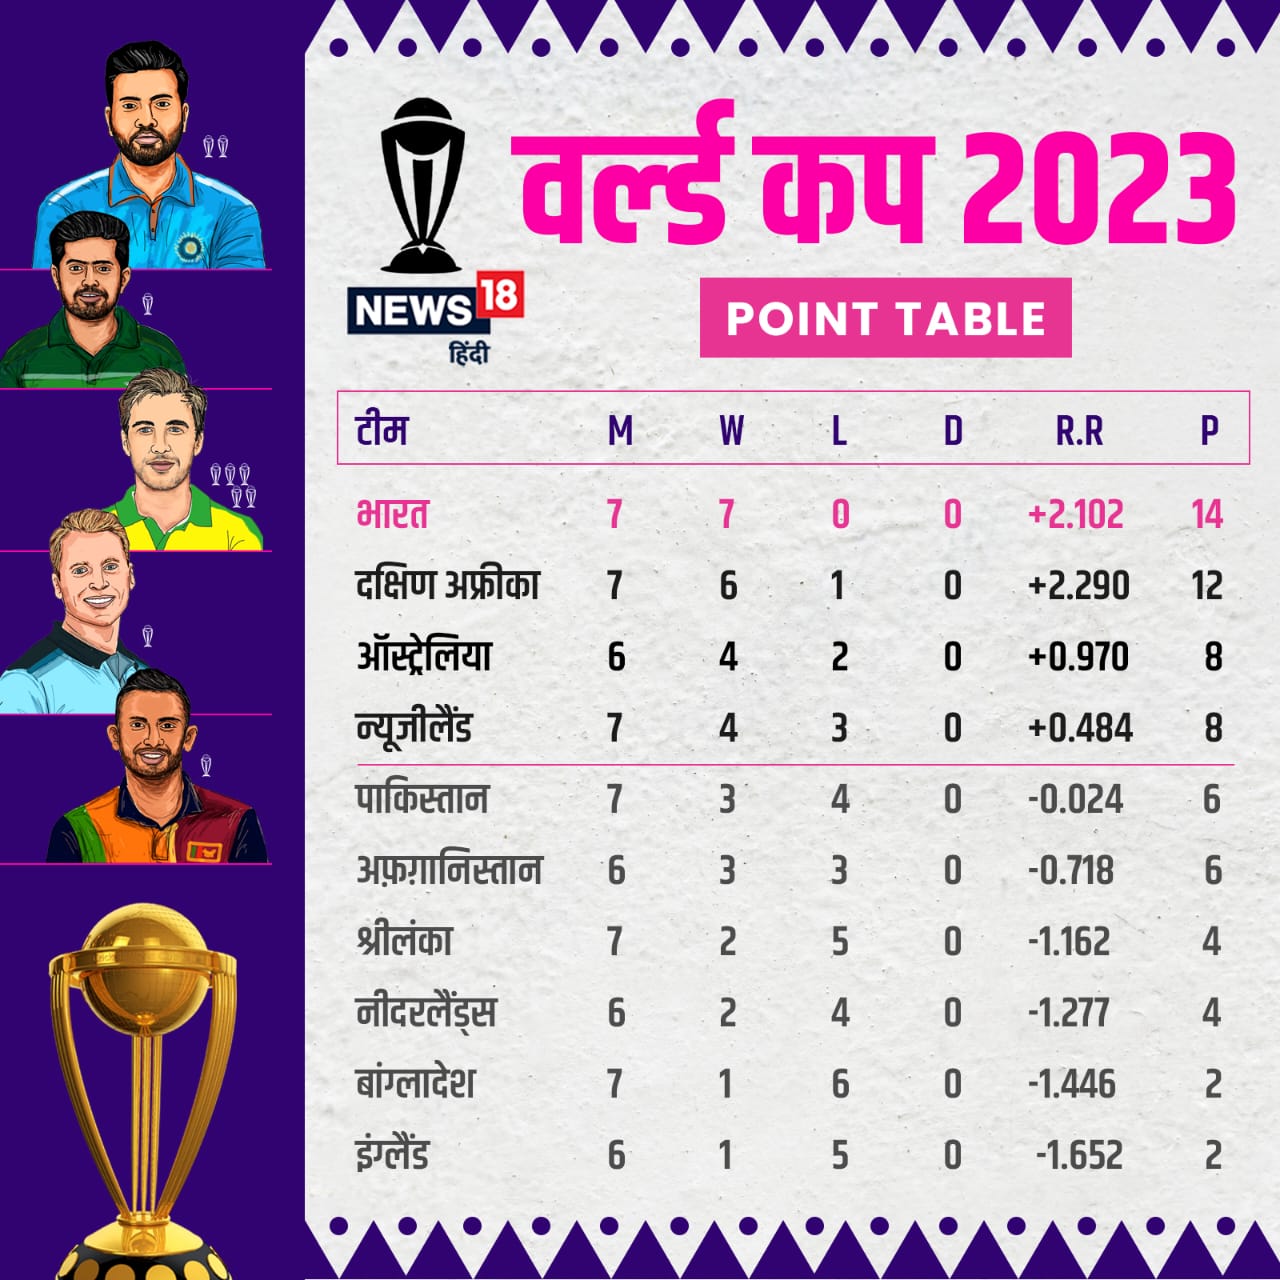 ICC World Cup 2023 Updated Points Table India, india beat sri lanka, ind vs sl, odi world cup points table, icc cricket world cup updated points table, cwc 2023 points table, india thrash sri lanka by 302 runs, india overtakes south africa points table, india topple wc points table, आईसीसी क्रिकेट विश्व कप